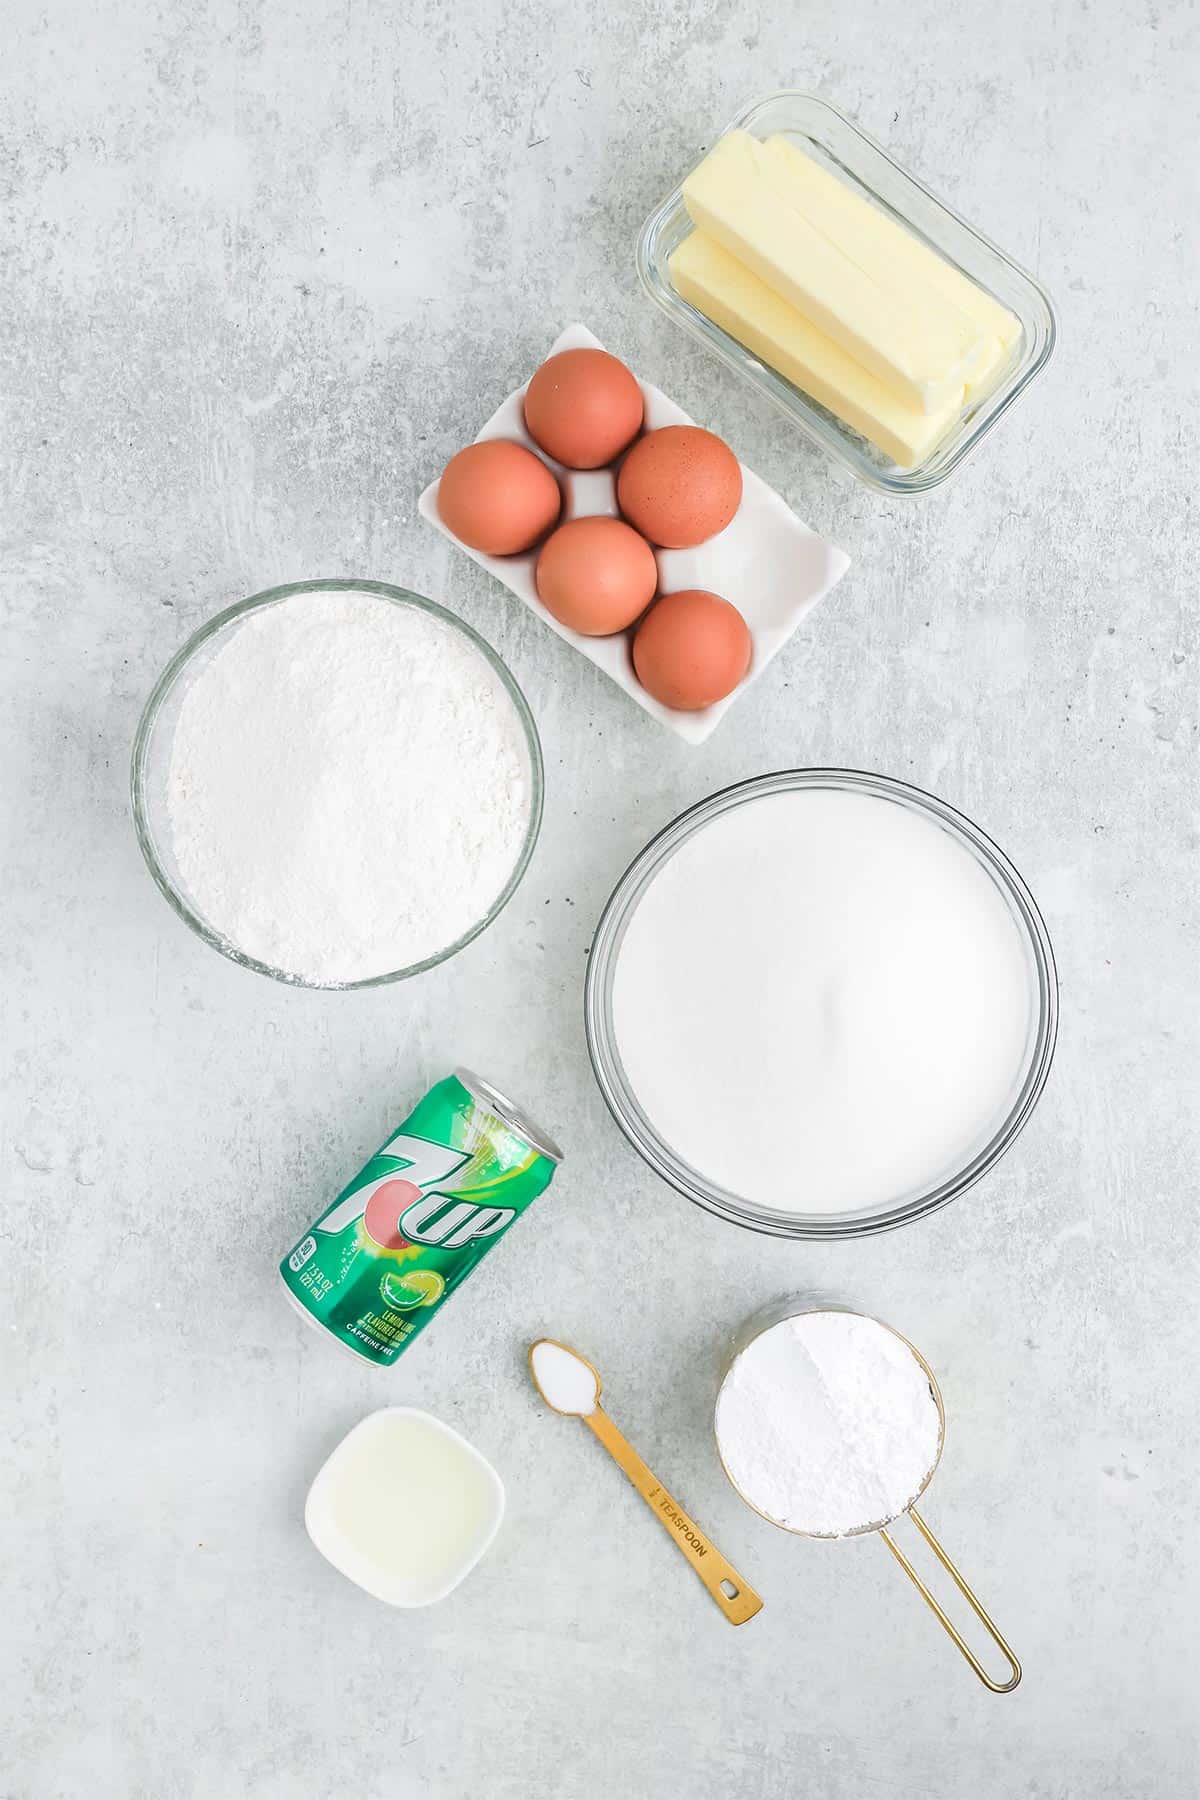 Ingredients to make a 7up cake on the counter.